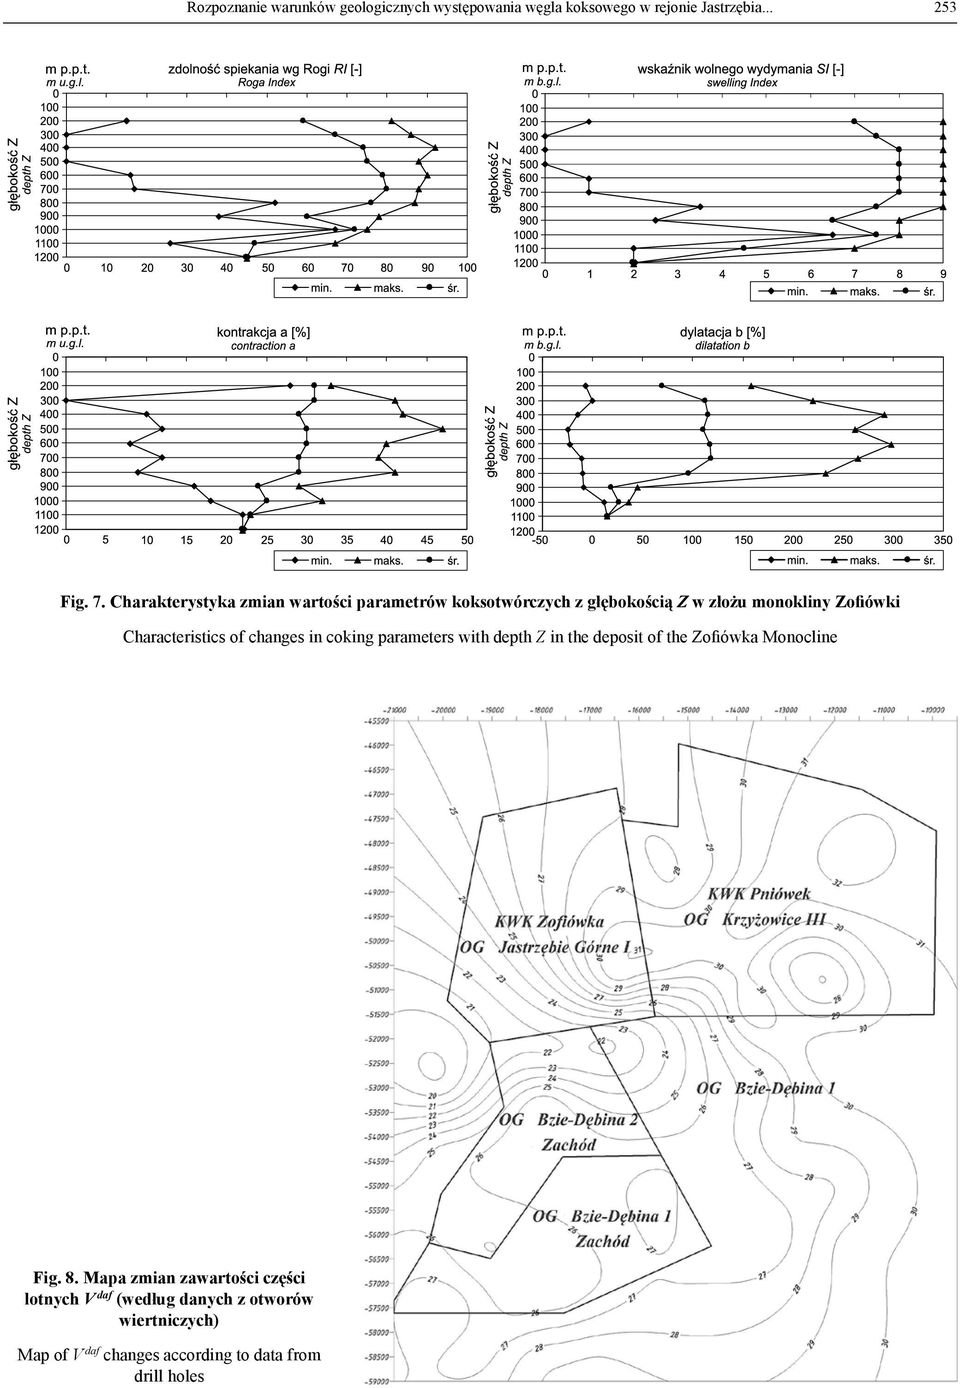 Characteristics of changes in coking parameters with depth Z in the deposit of the Monocline Fig. 8.